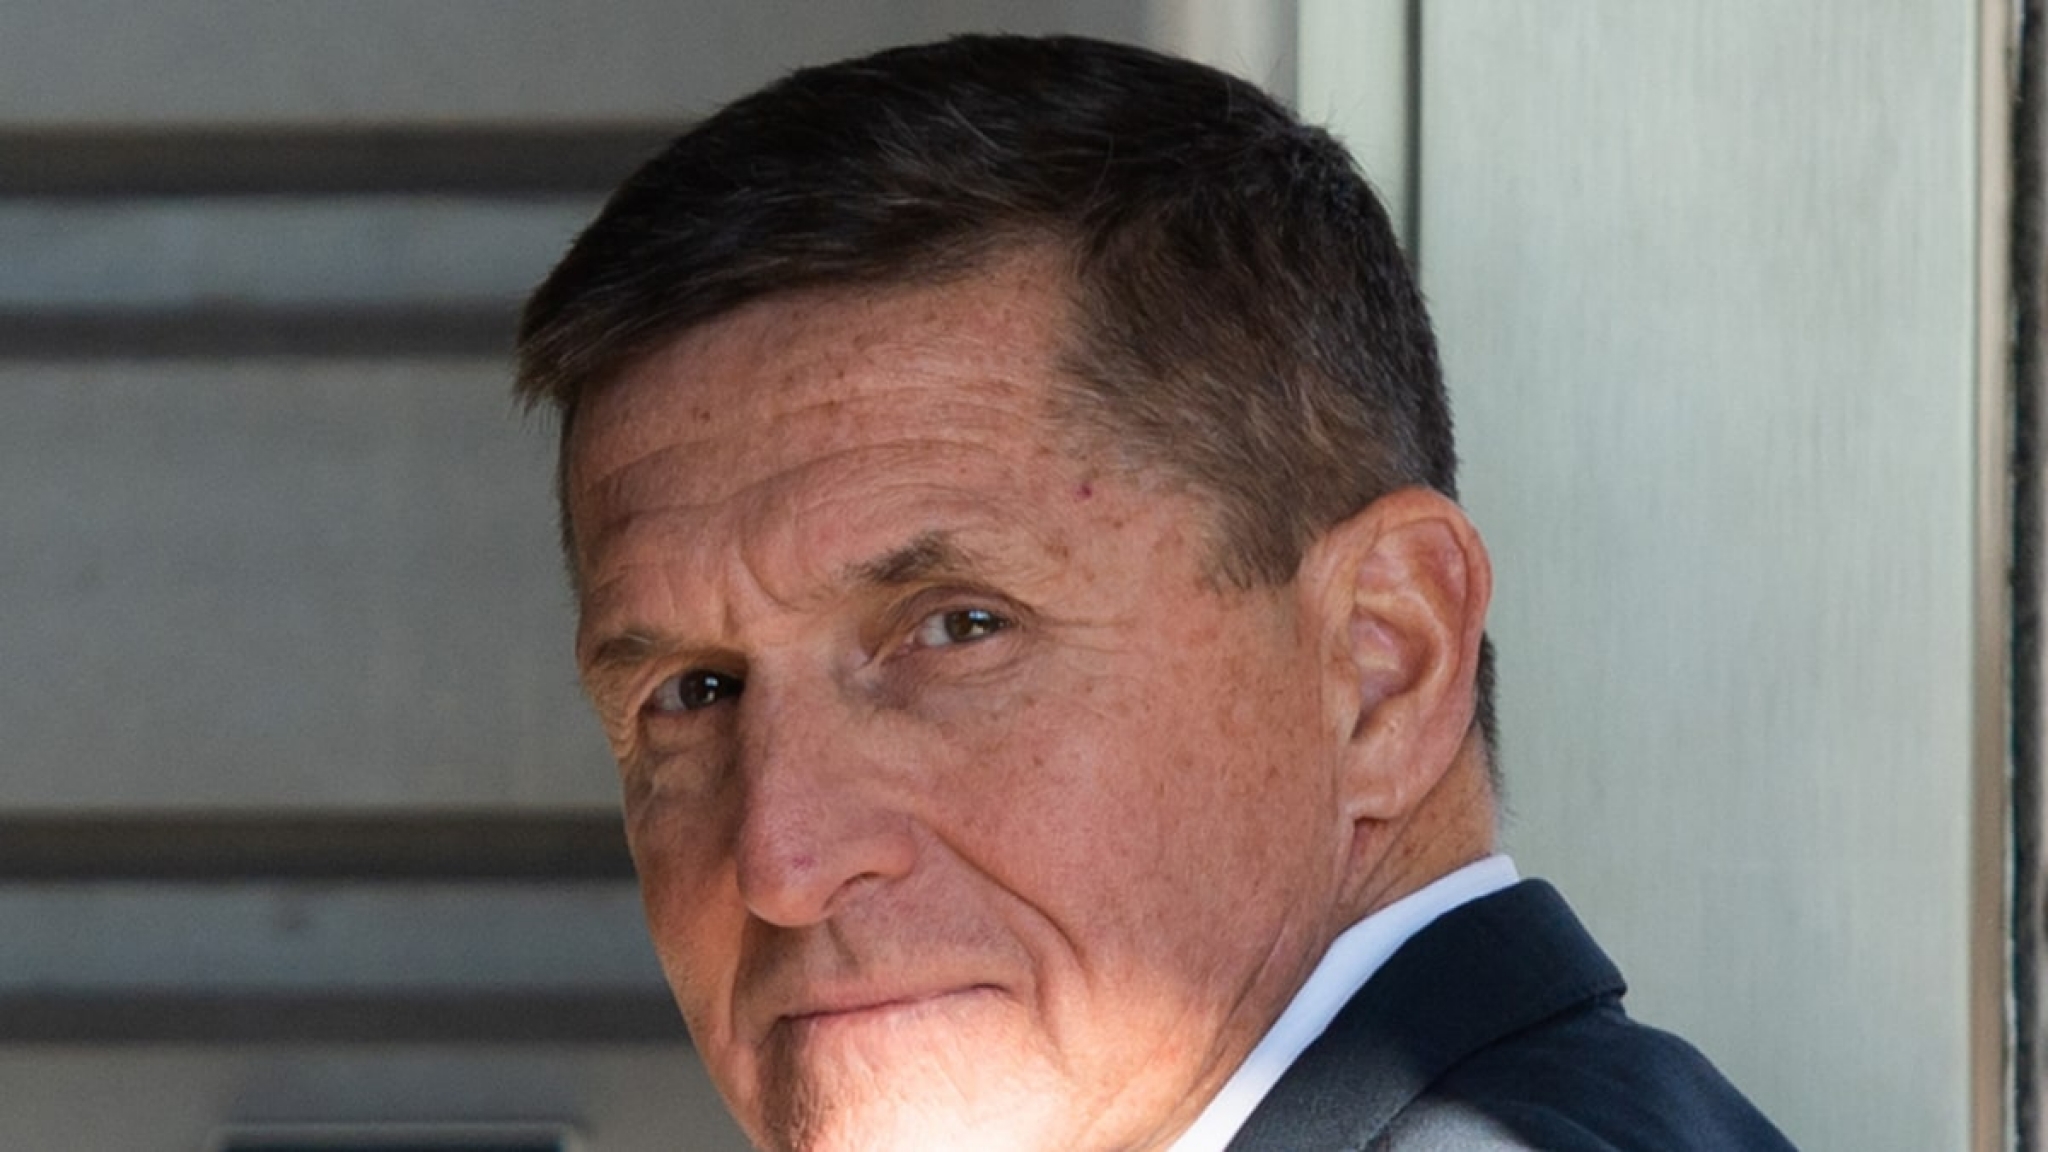 Michael Flynn Appears to Forget Pledge of Allegiance at Pro-Trump Rally